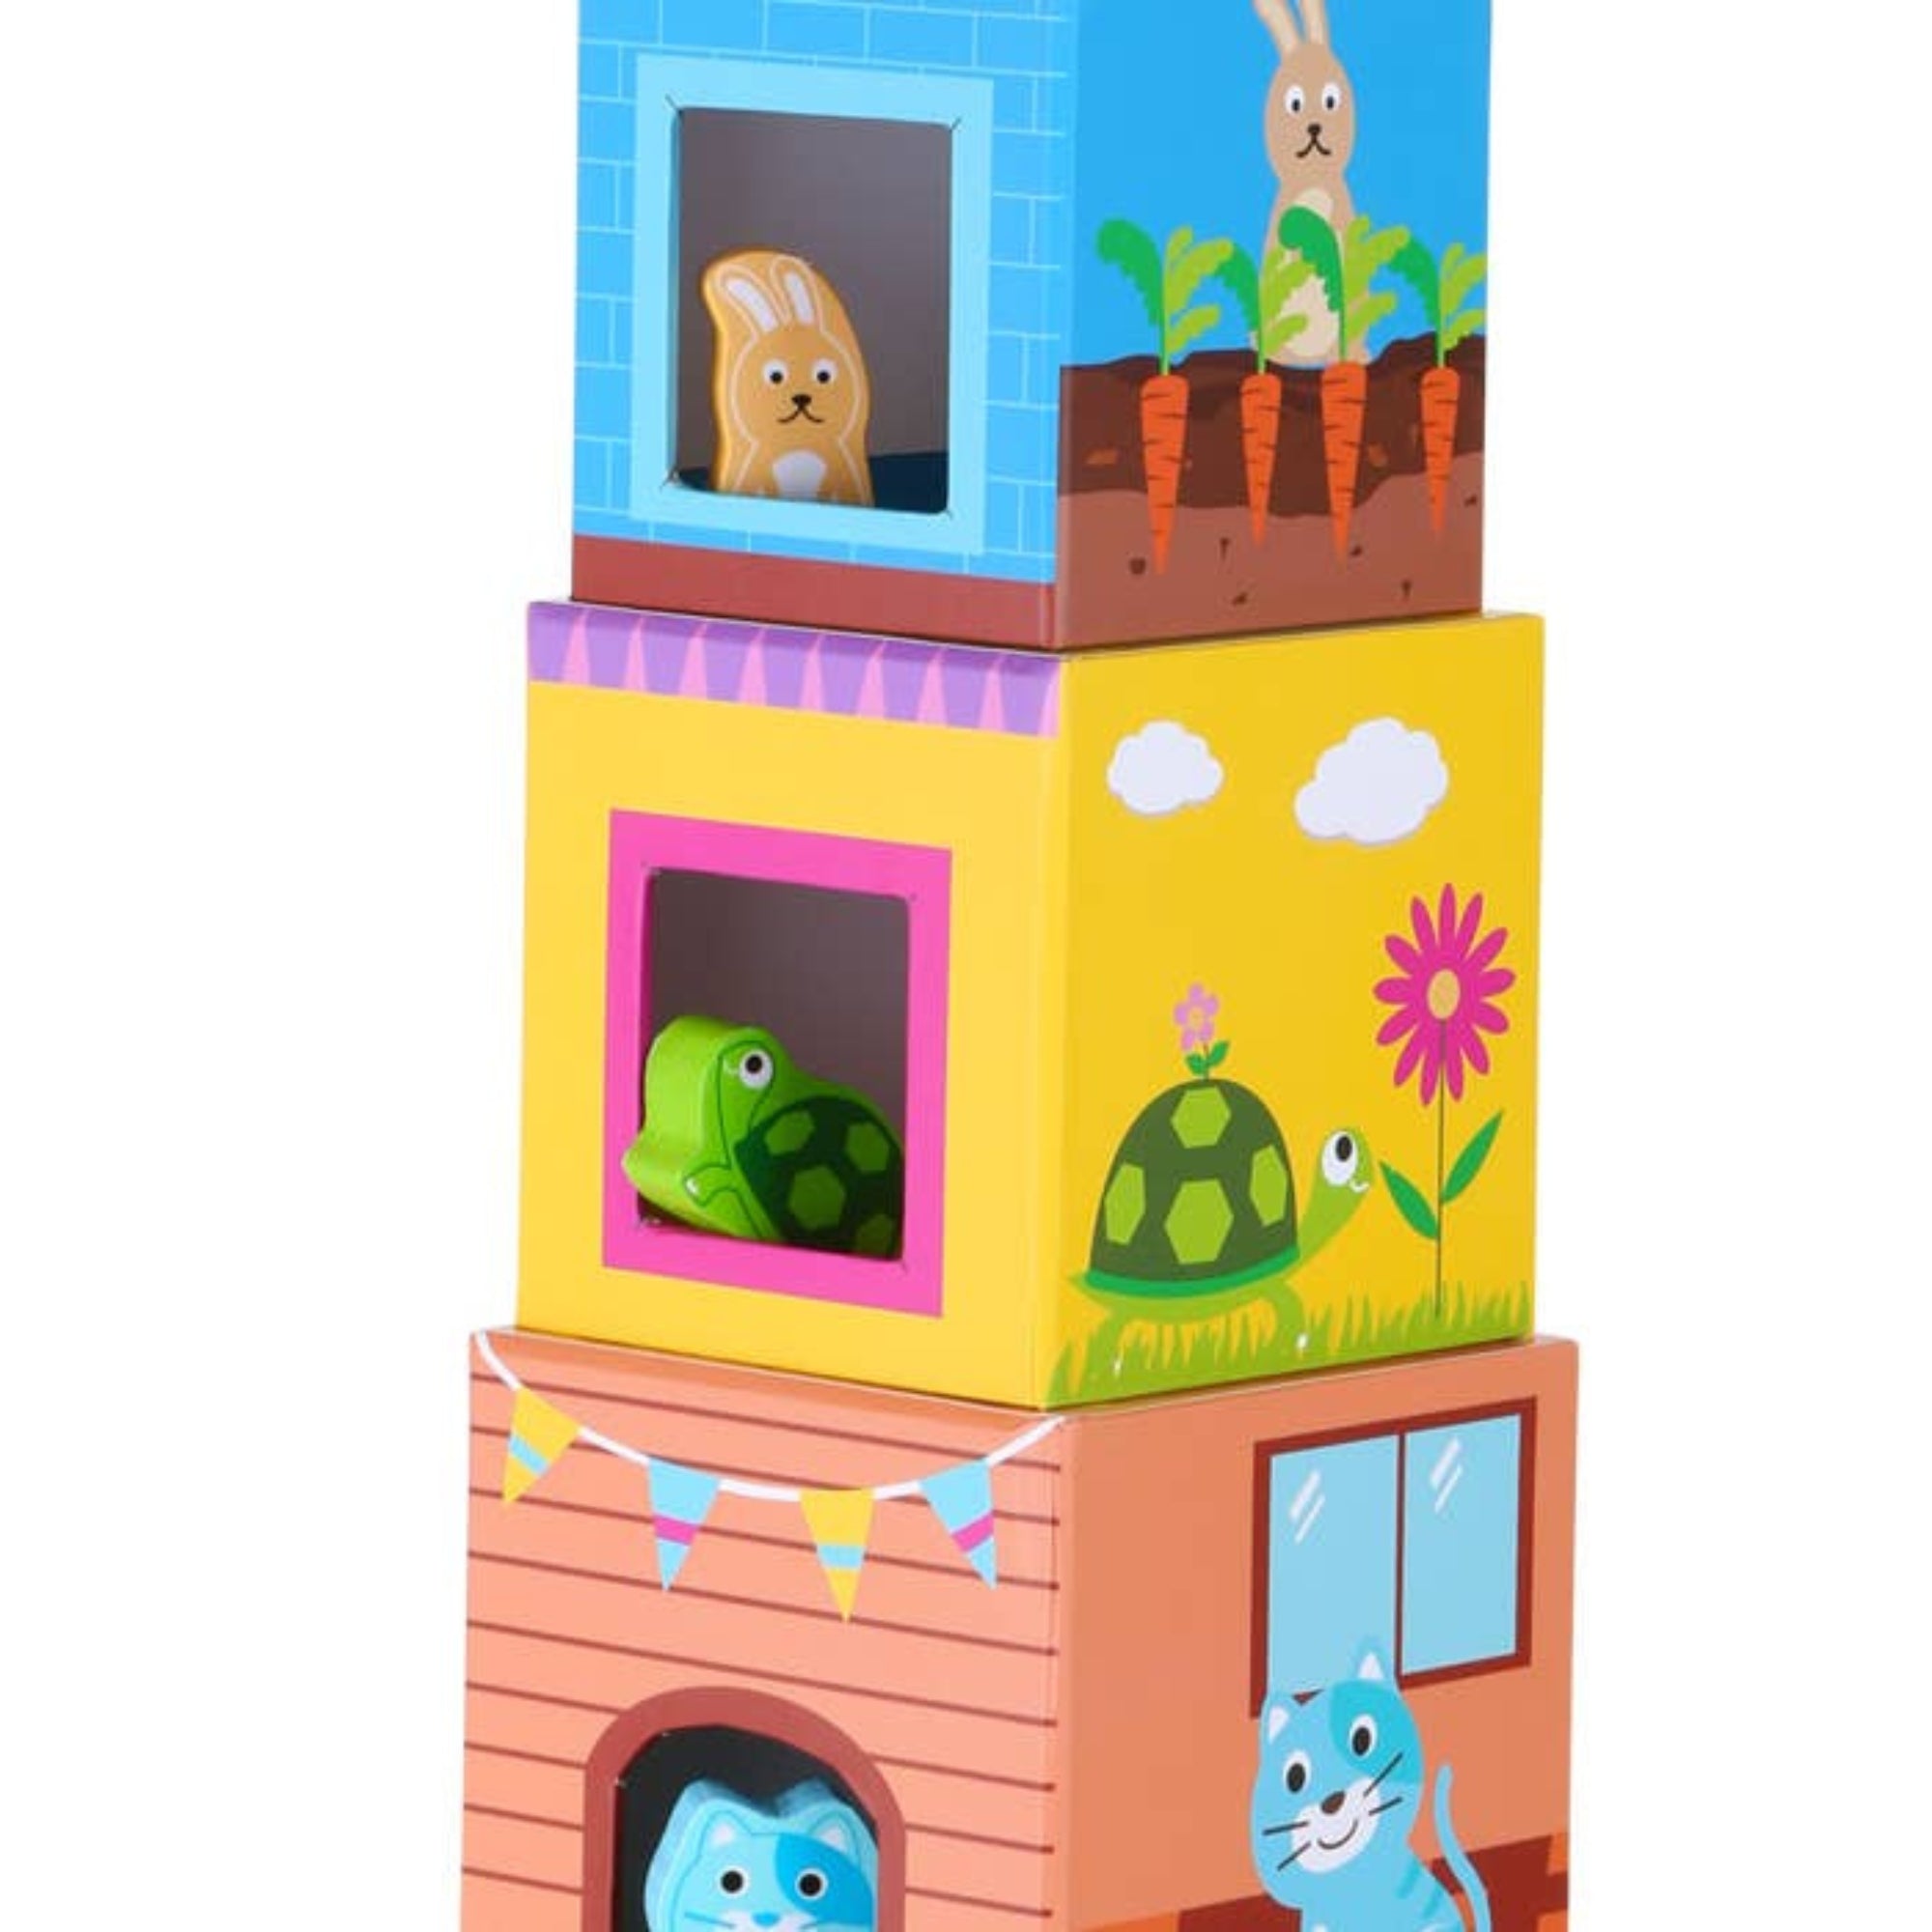 Stacking Cubes with Pets, Graduating in size, these delightful Stacking Cubes with Pets need to be stacked in the correct order, from largest to smallest, to create a tower. Each Stacking Cubes with Pets features a detailed pet scene, As little ones stack each Stacking Cubes with Pets, they can discuss the pet on one side, developing their language skills and vocabulary. Perfect for early learning, these cubes are a versatile learning aid. Stacking Cubes with Pets Once playtime is over, the stacking blocks 